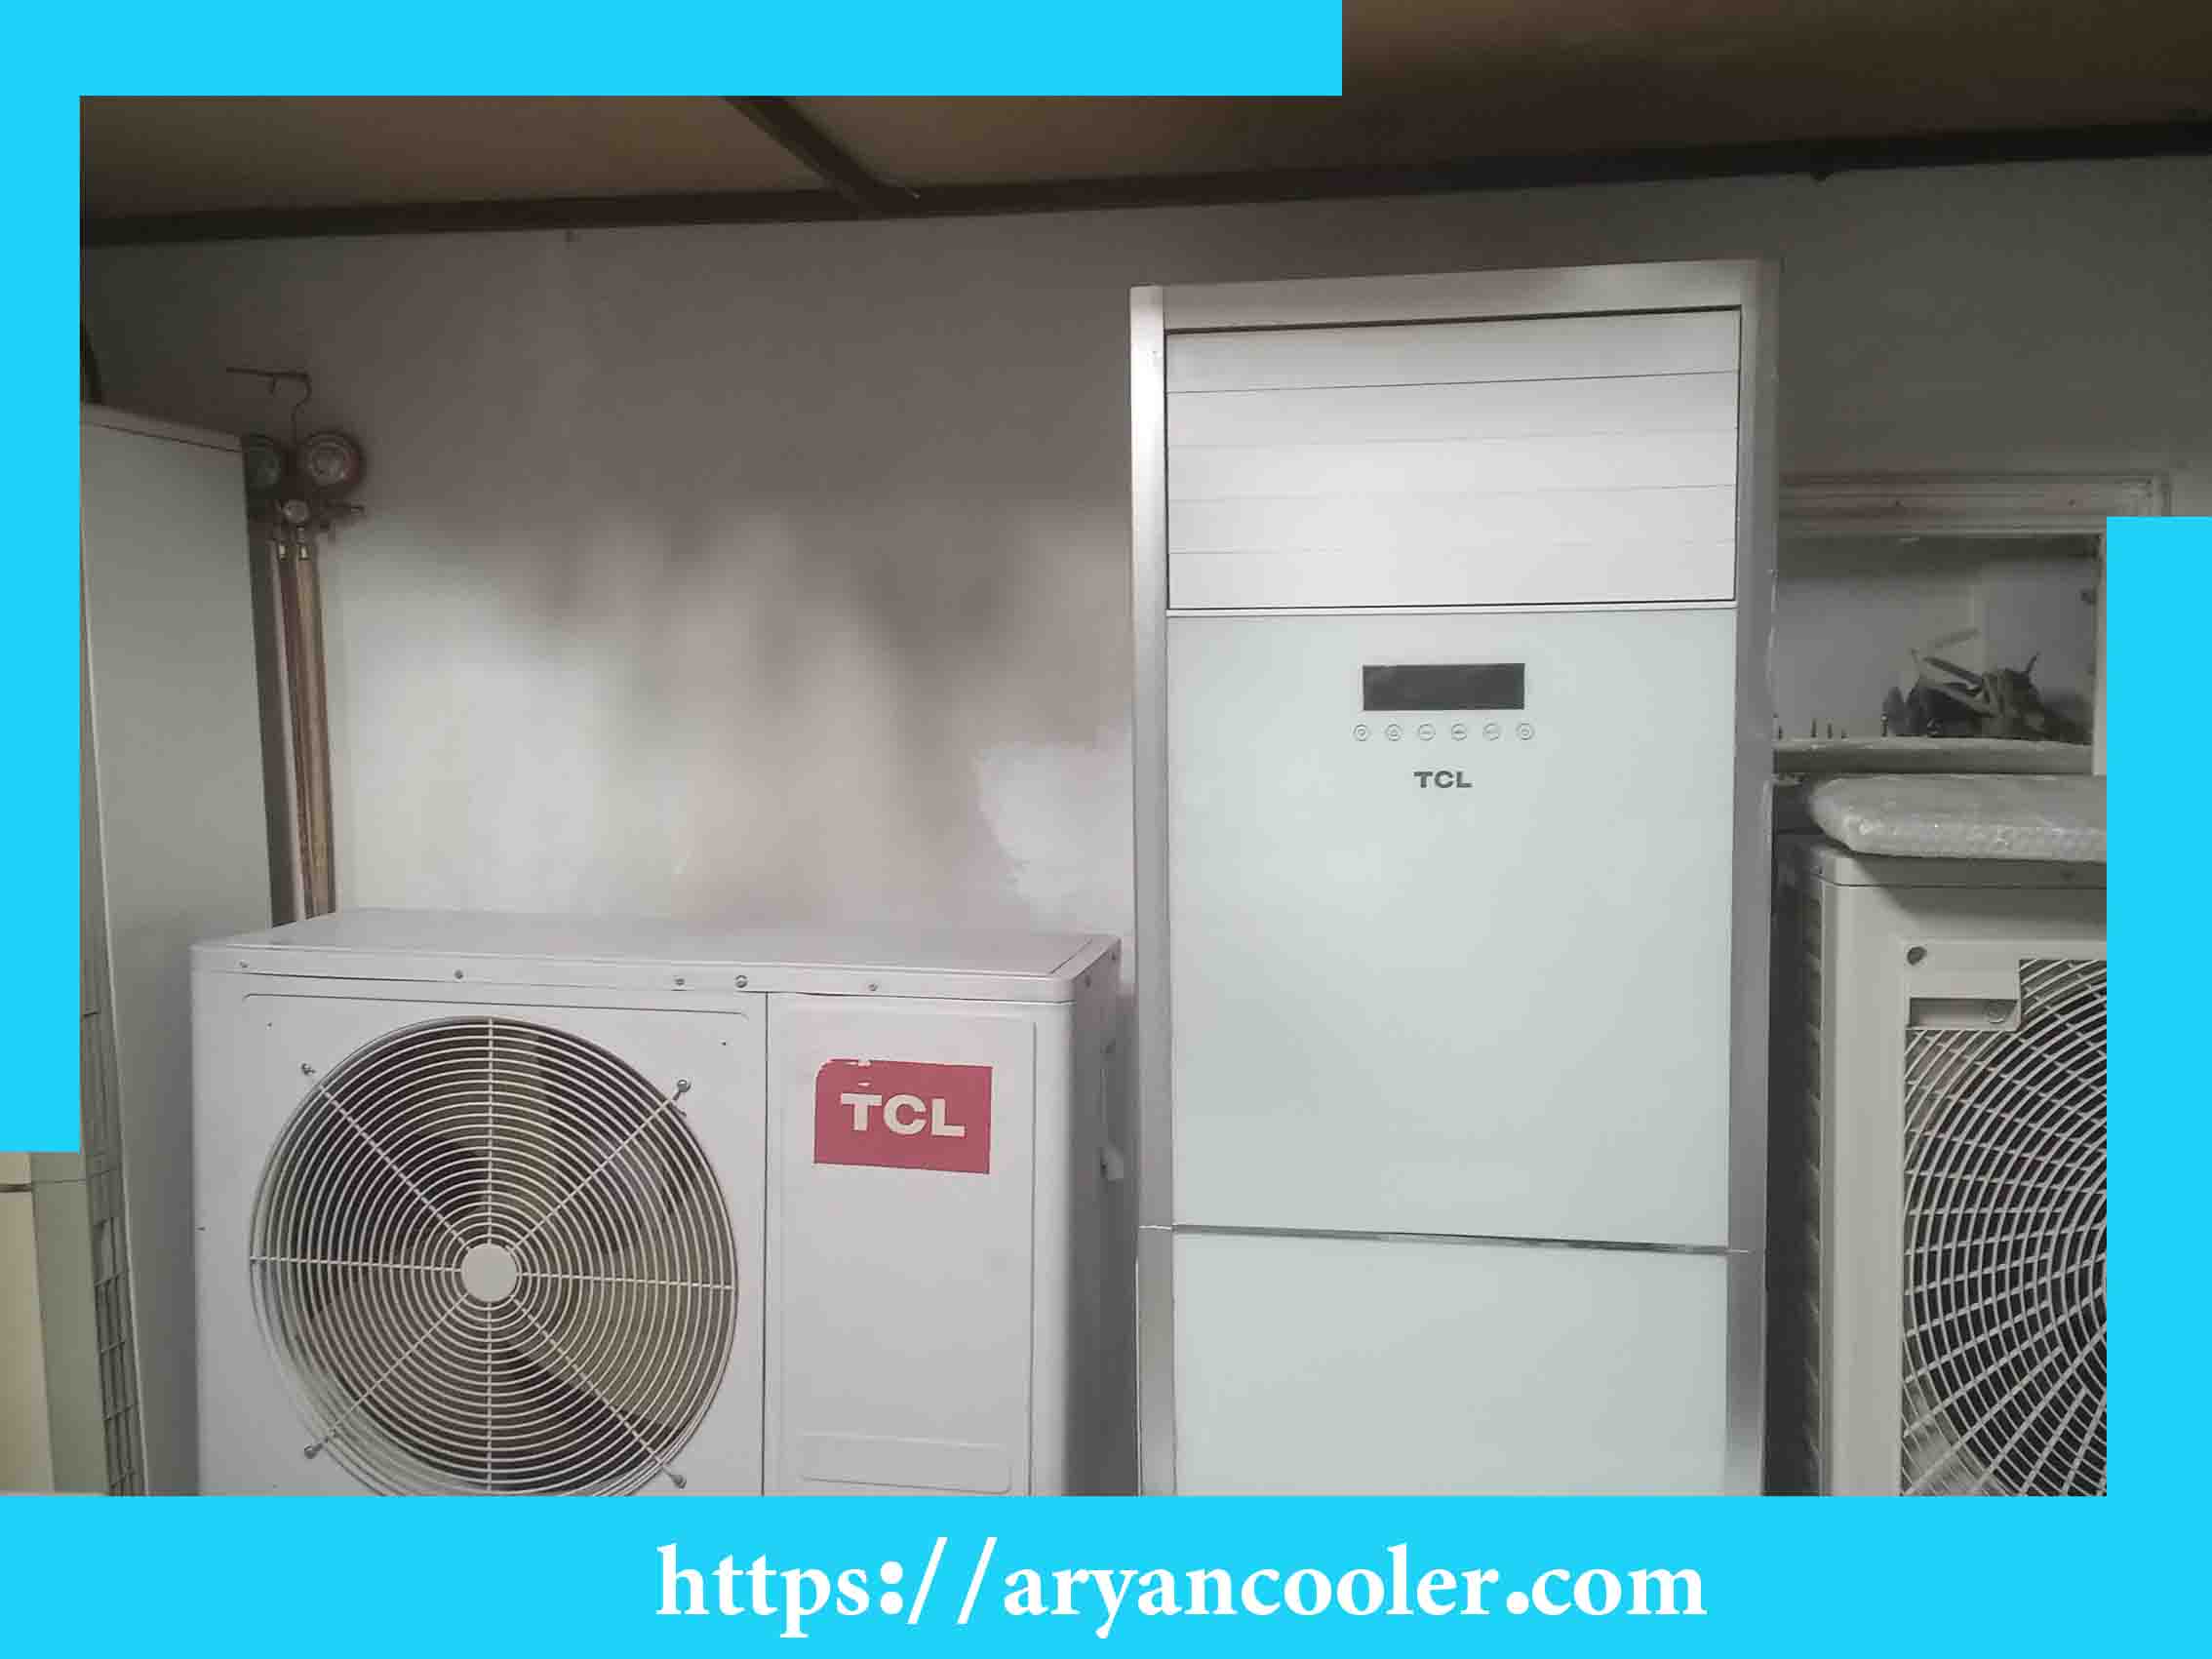 TCL air conditioner